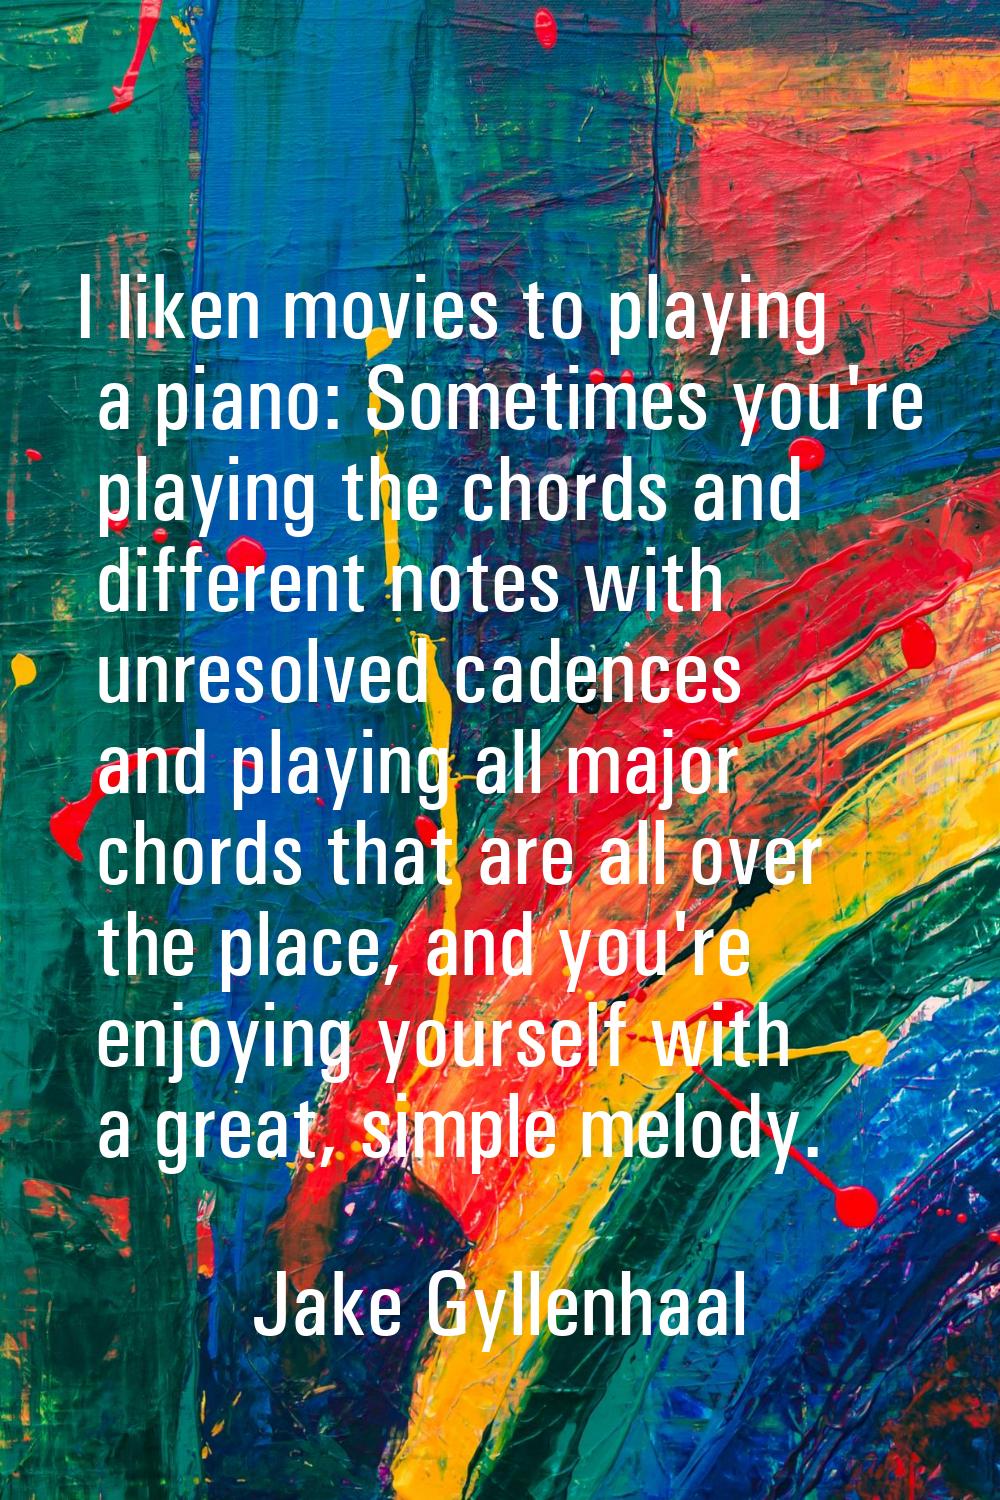 I liken movies to playing a piano: Sometimes you're playing the chords and different notes with unr